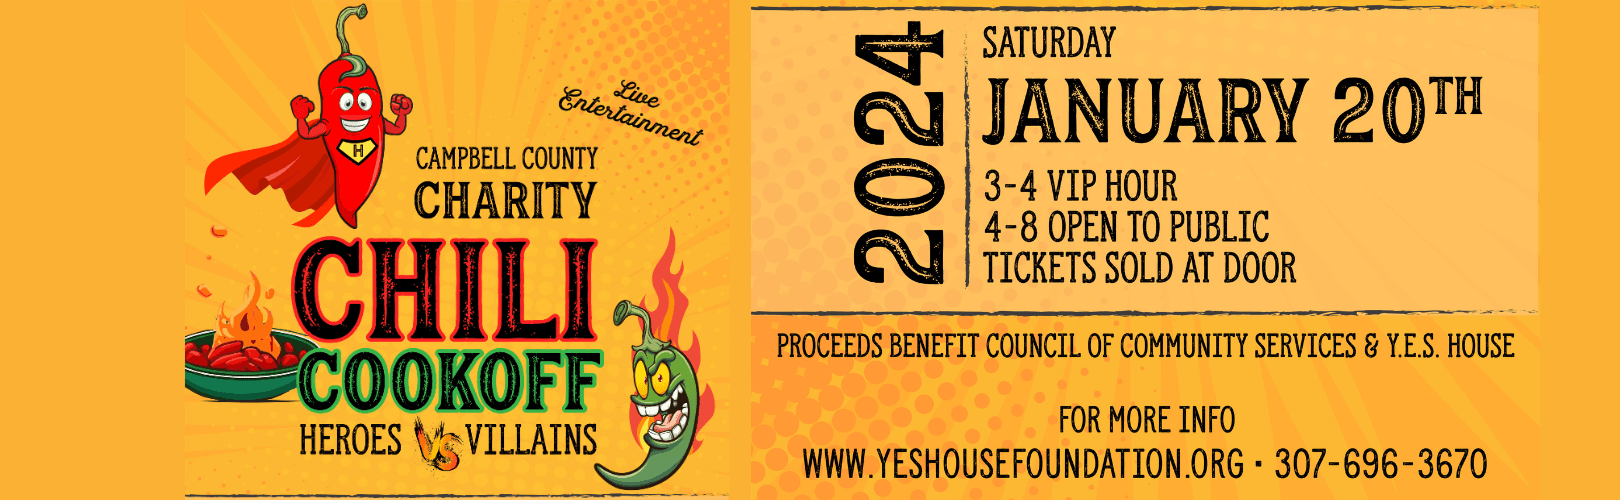 Register your team for the Chili Cookoff!